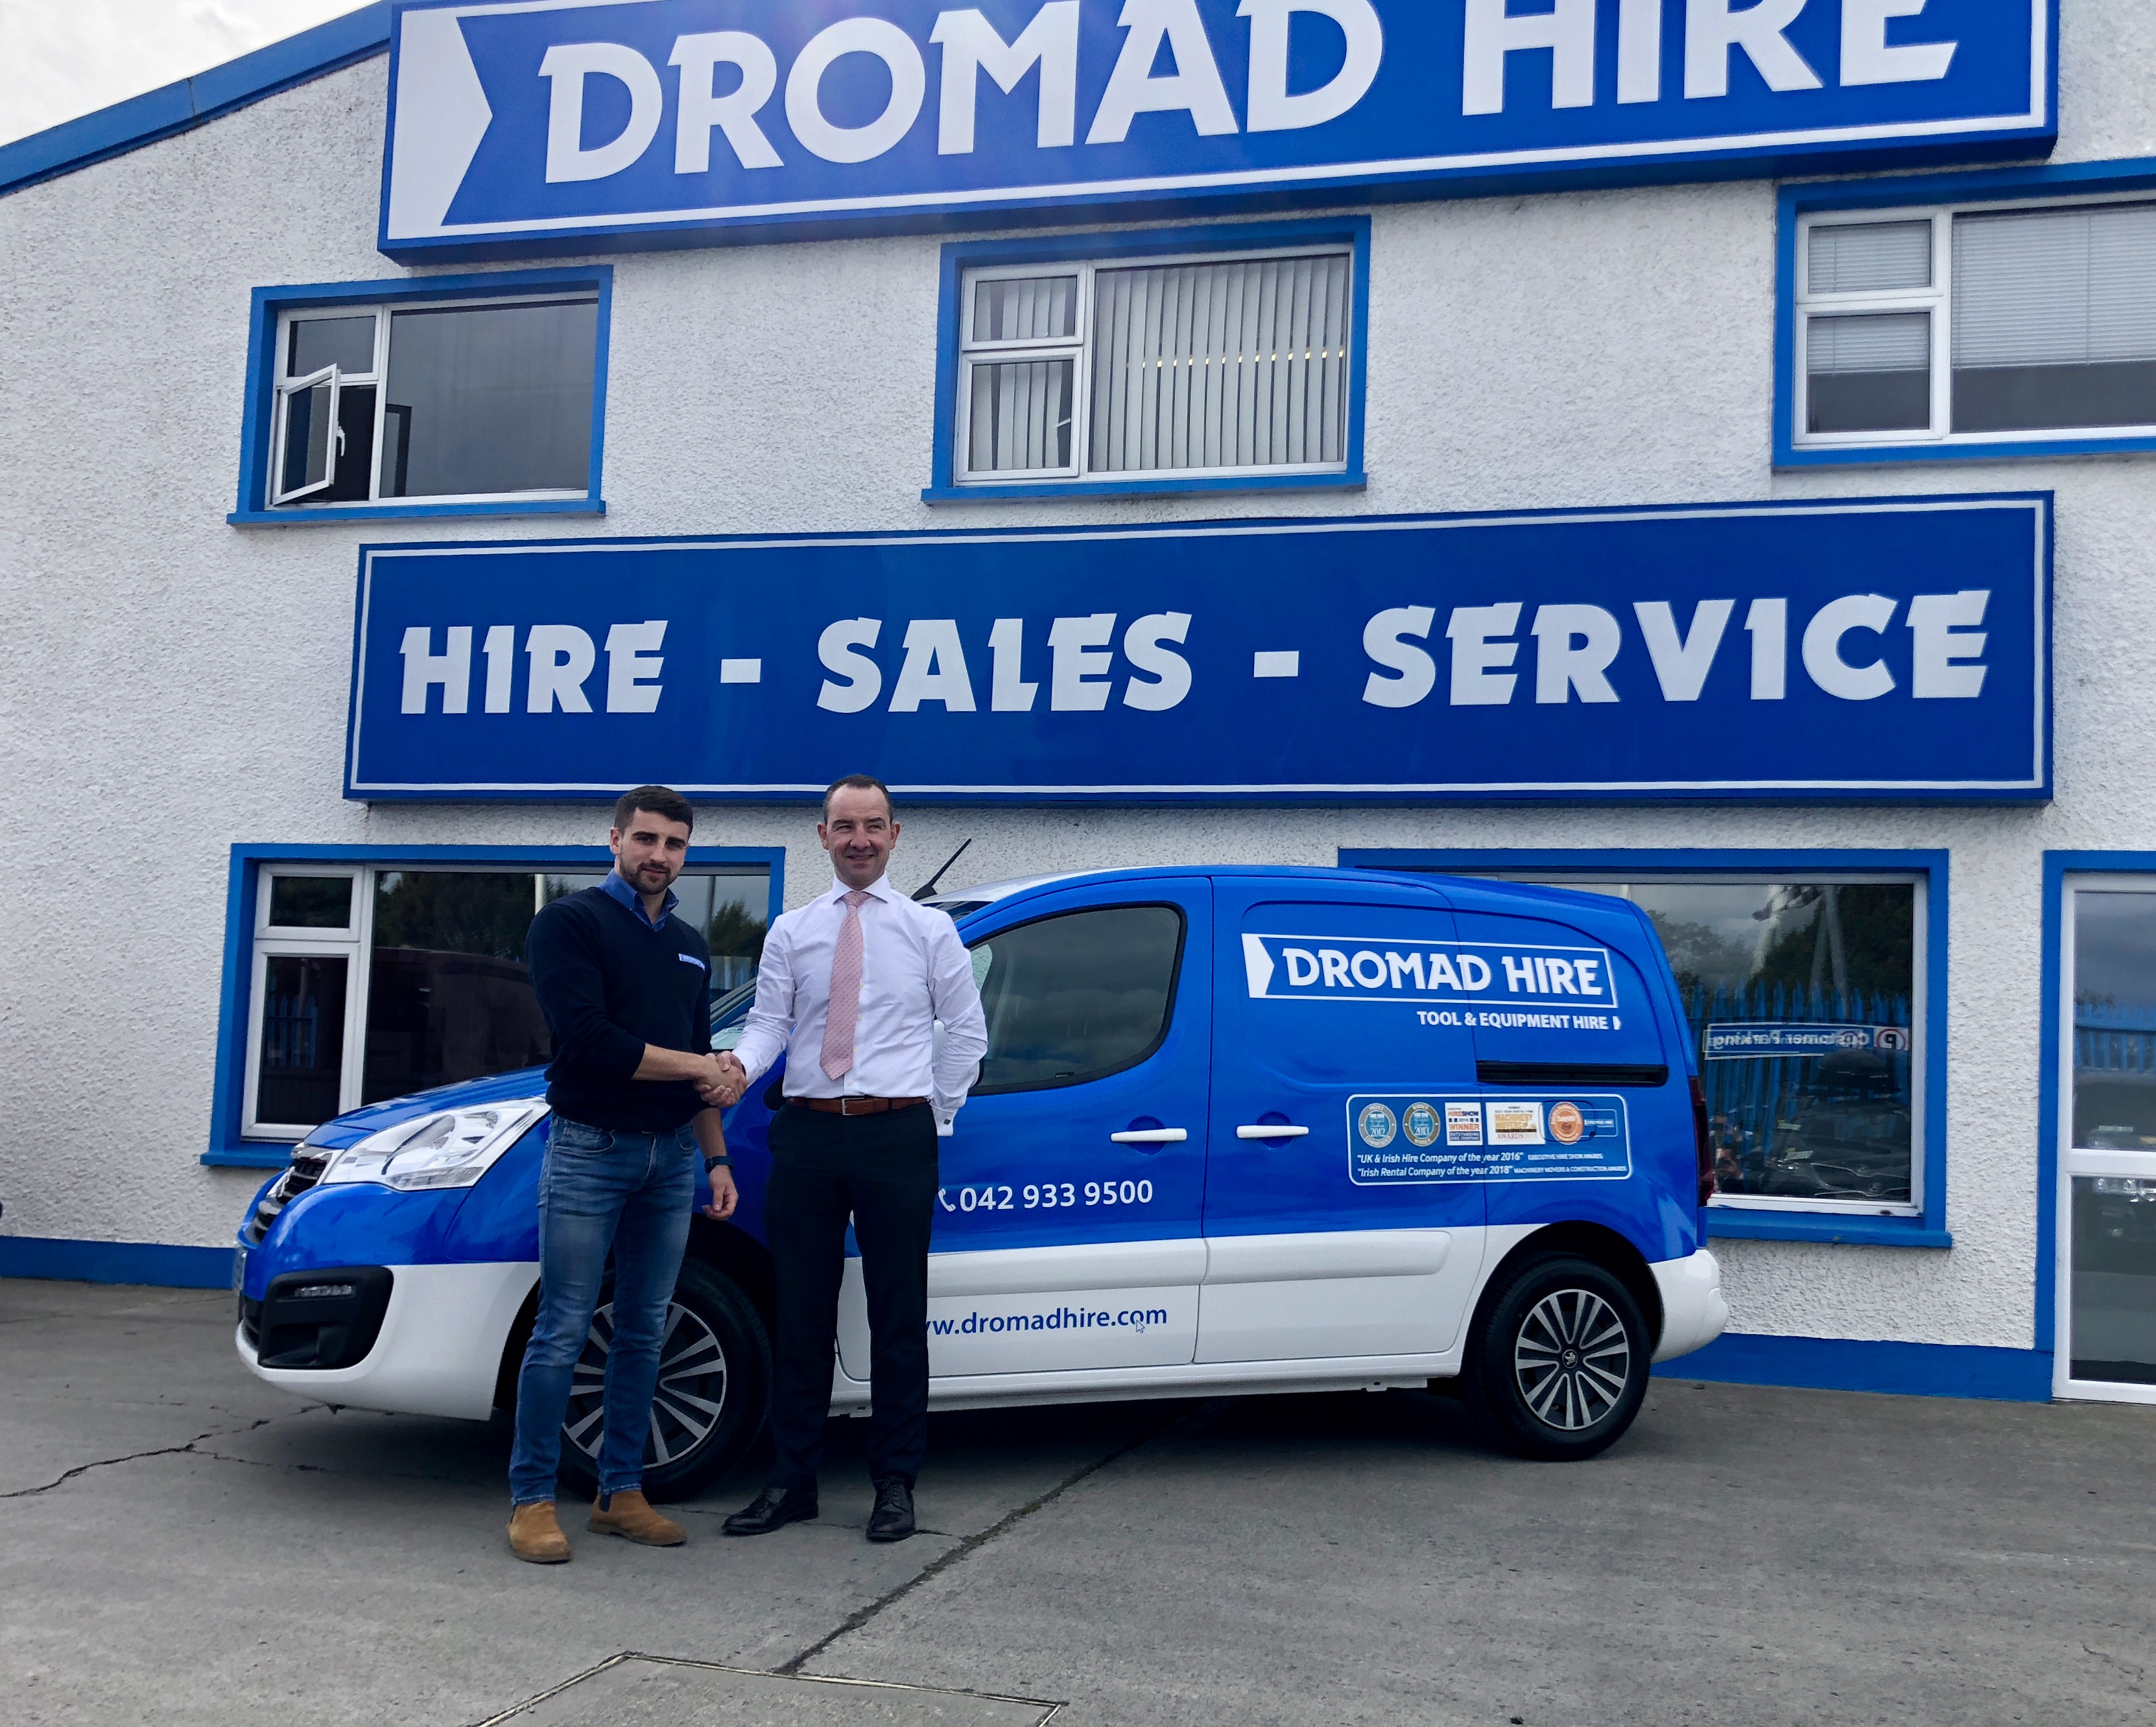 New Service Vans Arriving at the Companies Head Office in Dundalk 7-9-18